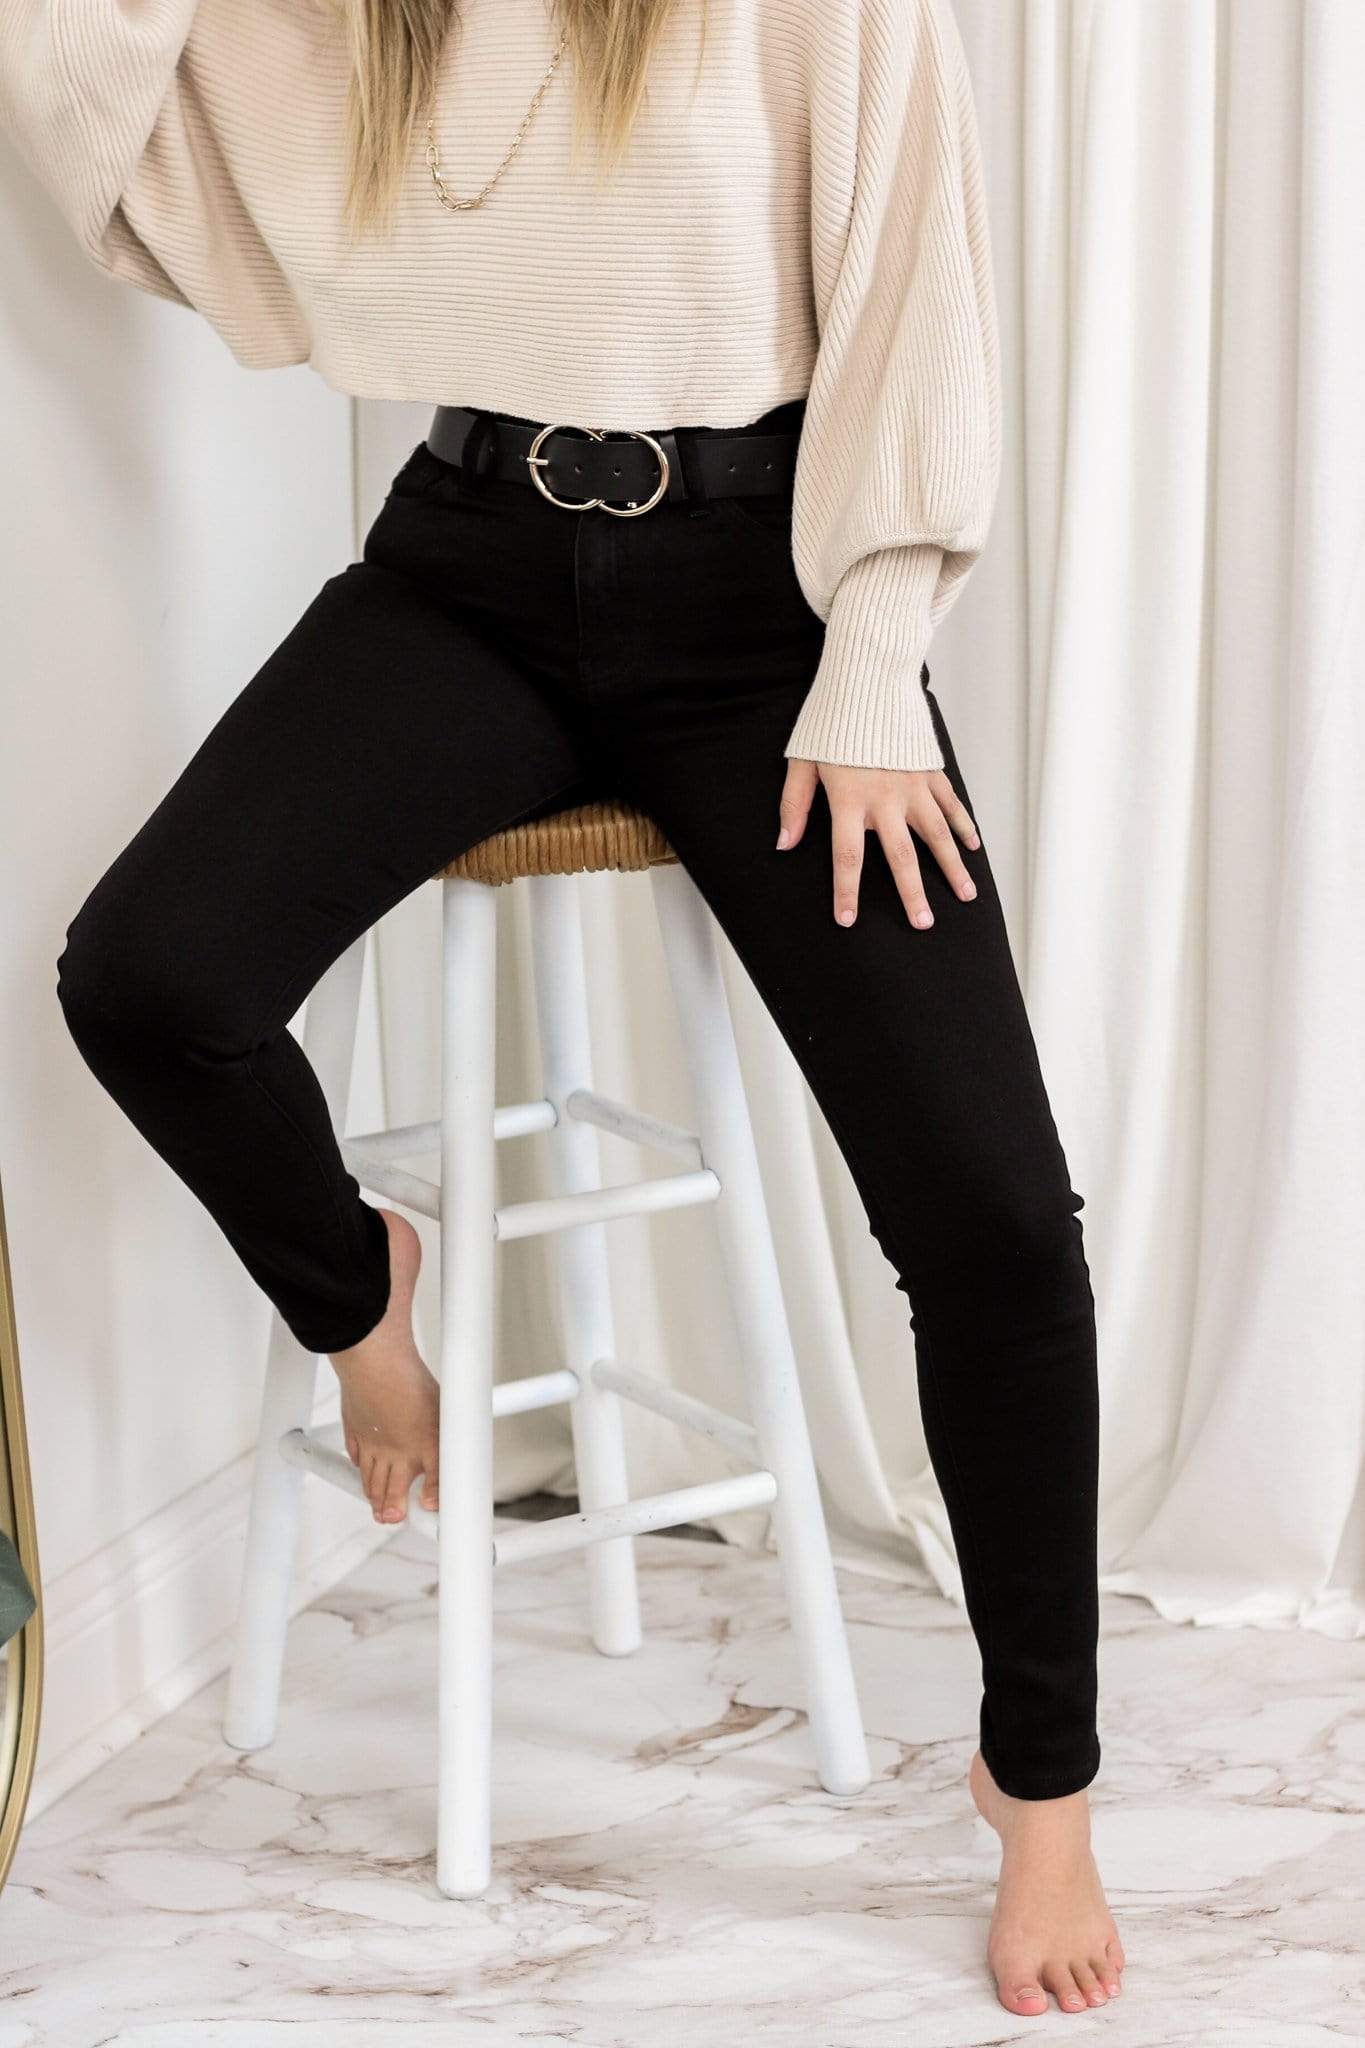 Black High Rise Super Skinnies - Select Trends Boutique